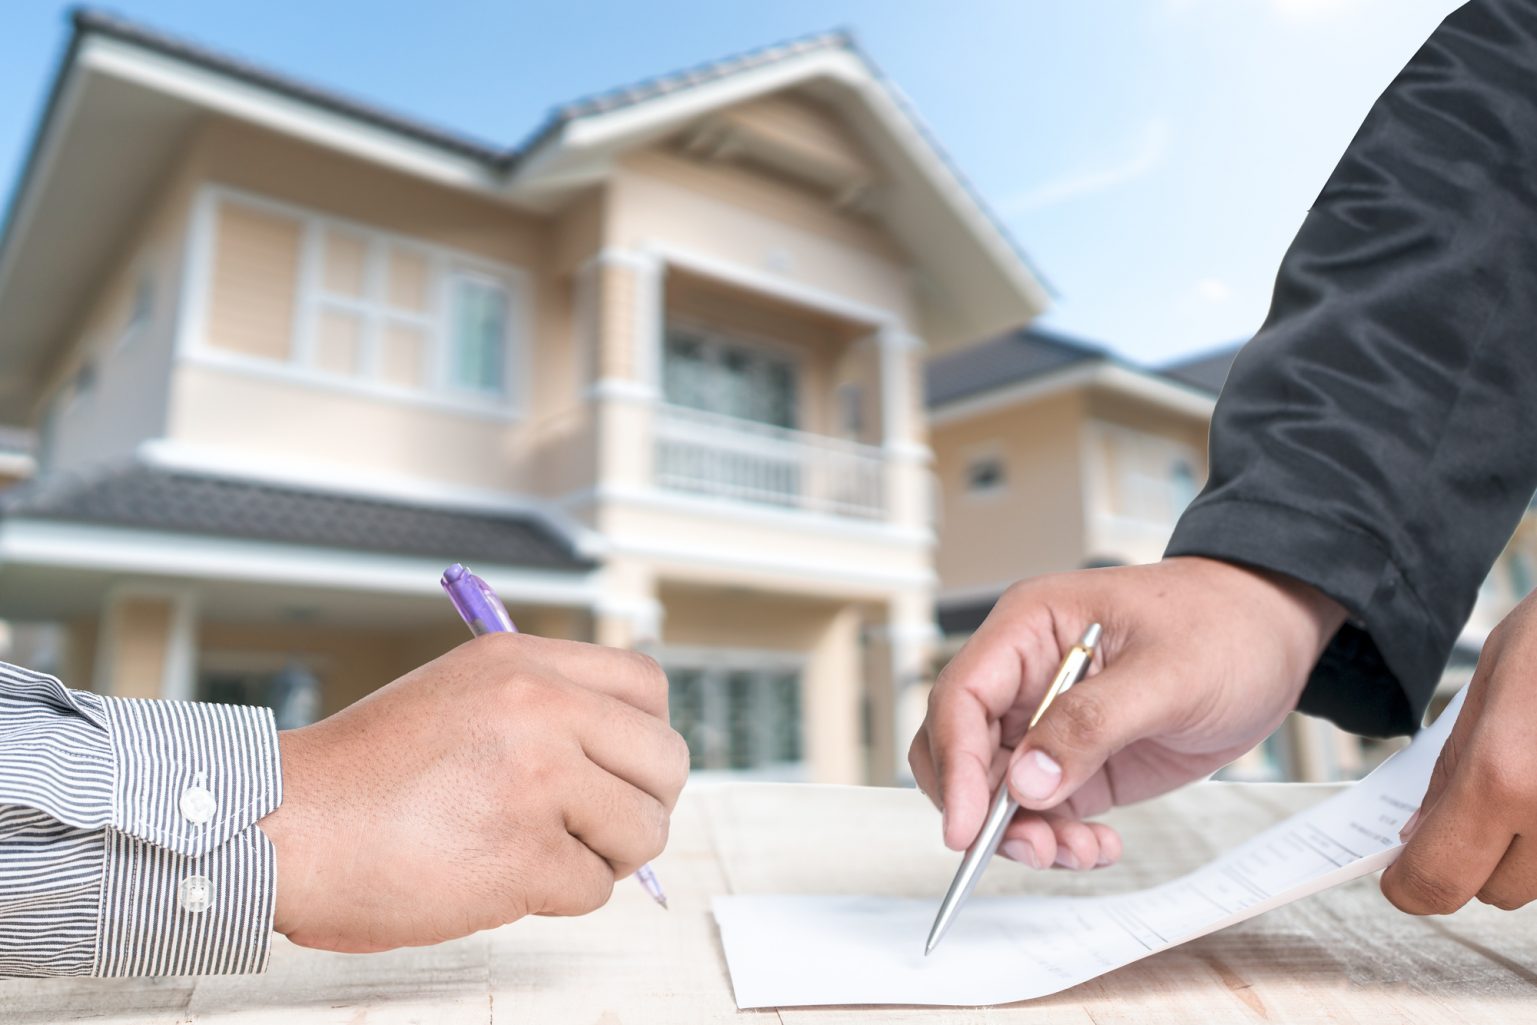 How can I prepare beforehand to sell or purchase a property?